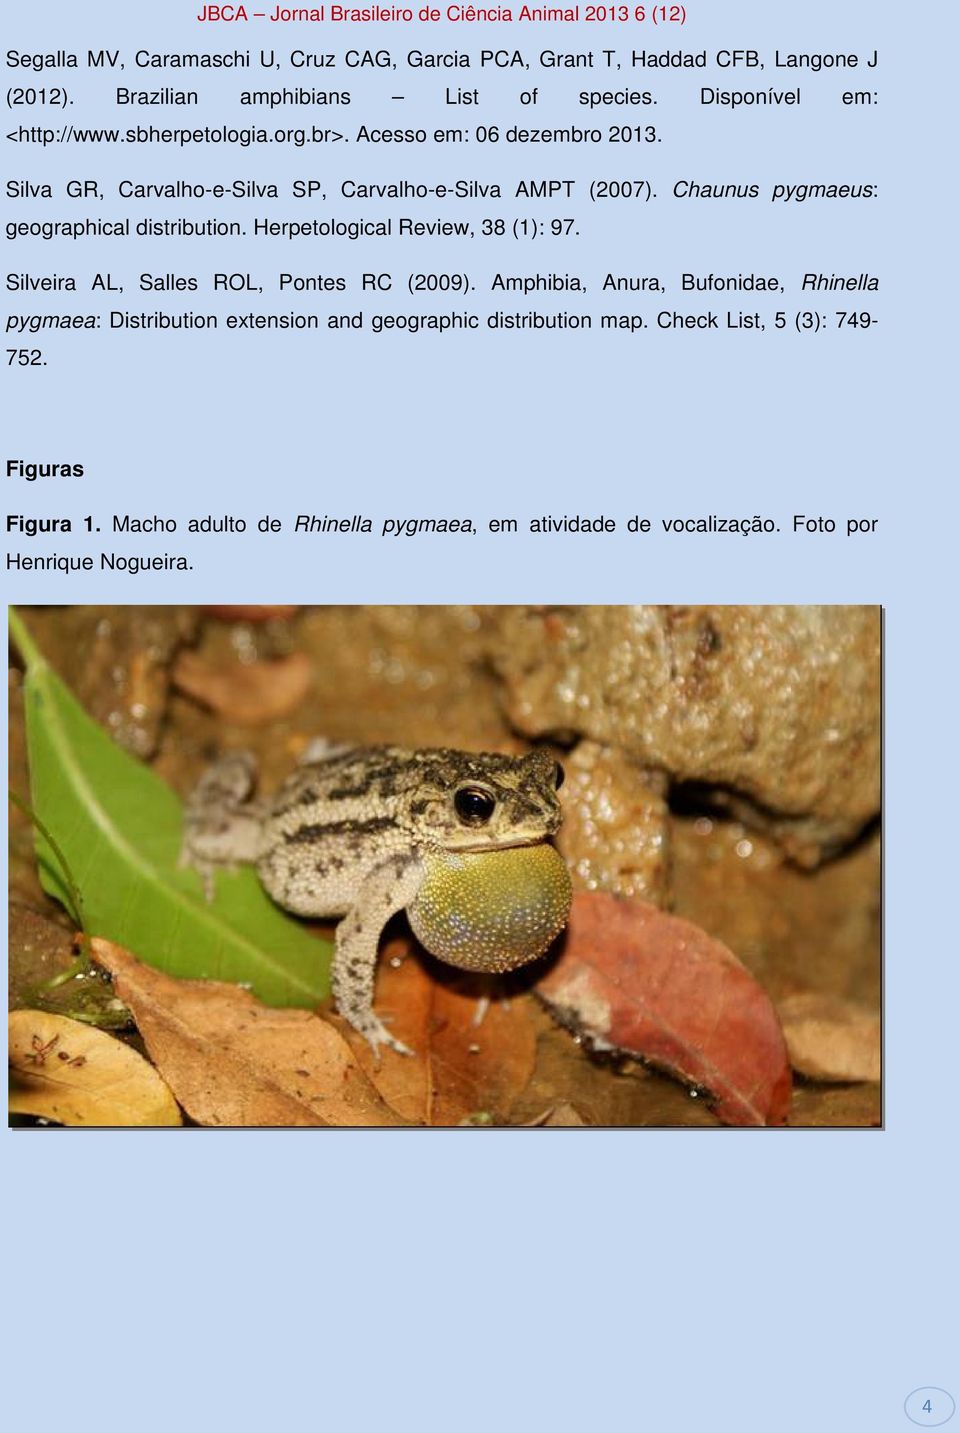 Herpetological Review, 38 (1): 97. Silveira AL, Salles ROL, Pontes RC (2009).